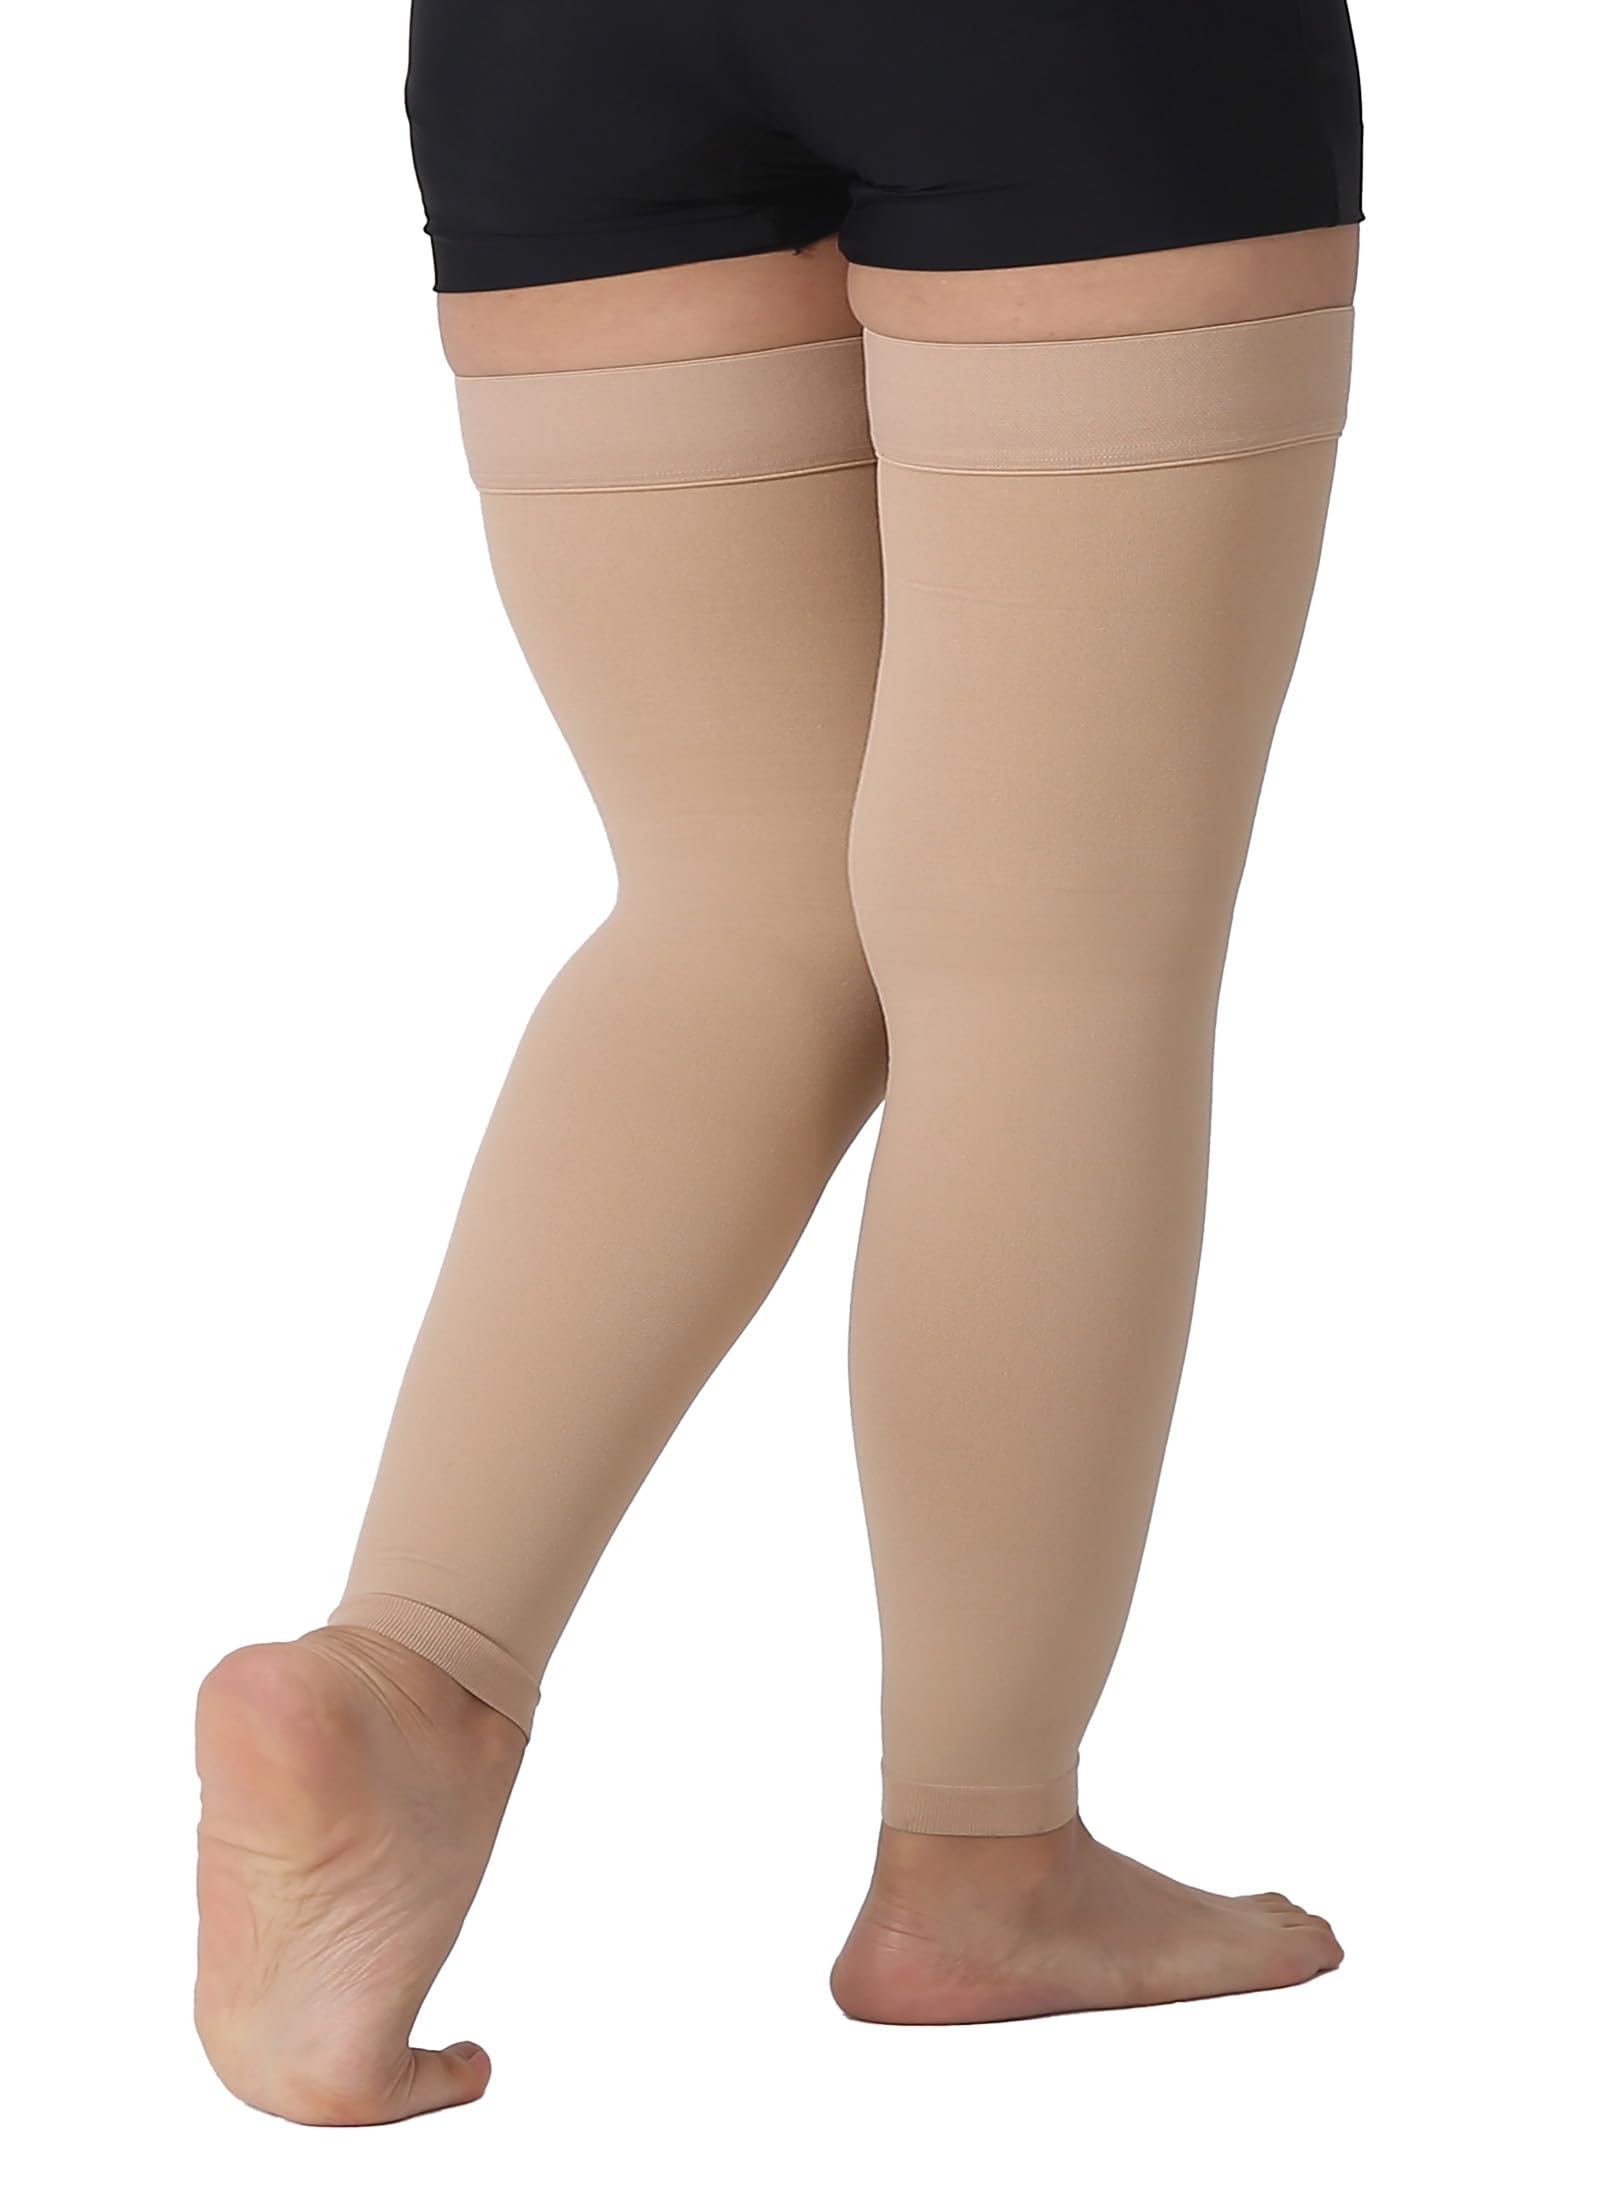  Footless Compression Tights For Women Circulation 20-30mmHg  - Opaque Compression Support Leggings For Lymphedema